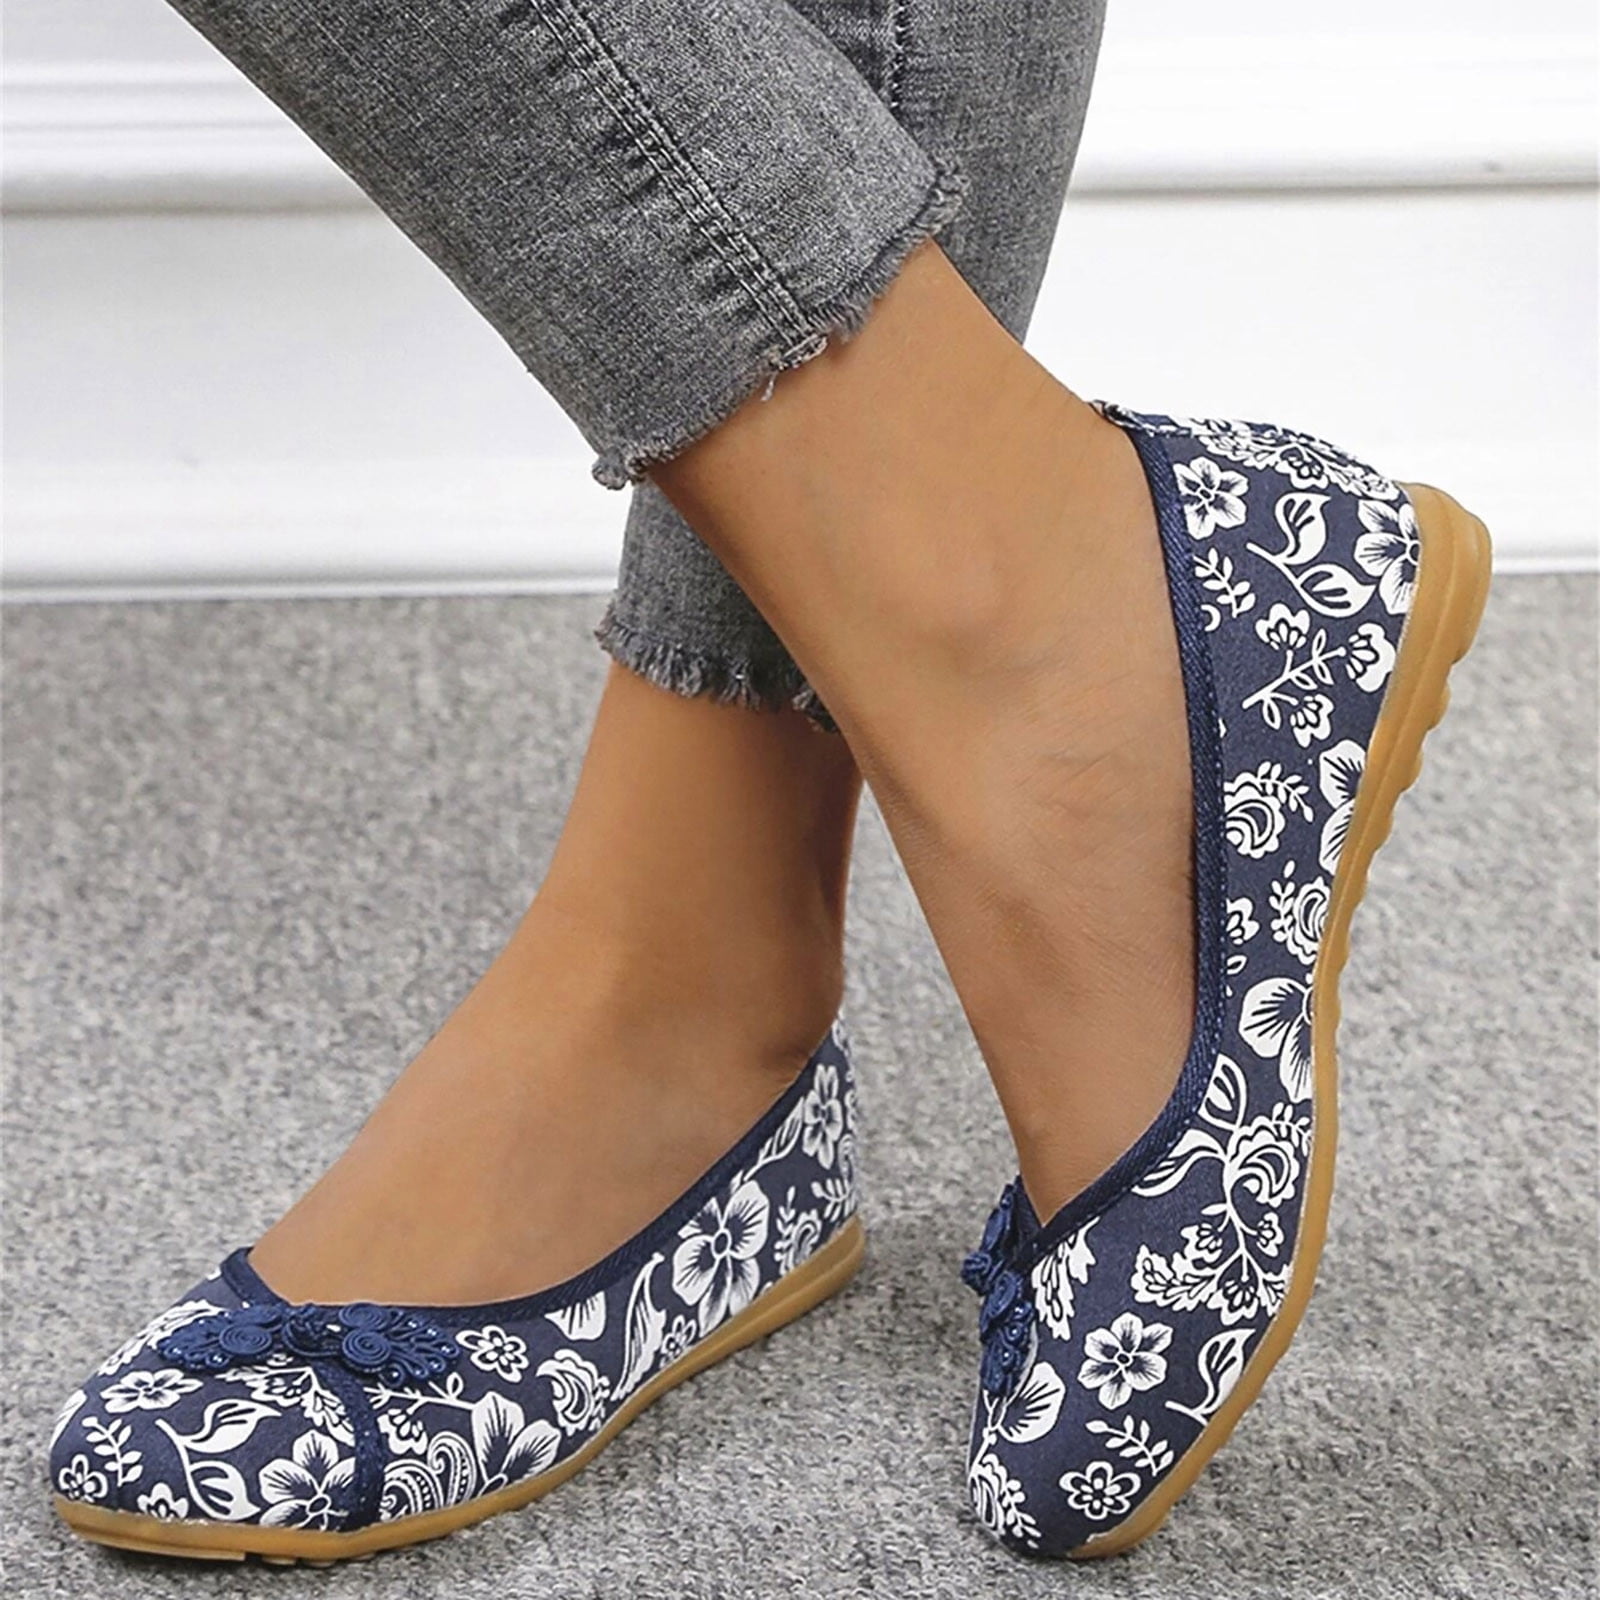 Floral Print Button Decor Ballet Flats For Women Slip On Shallow Mouth  Simple Single Shoes Casual Shoes Work Shoes Blue 6.5(37) 